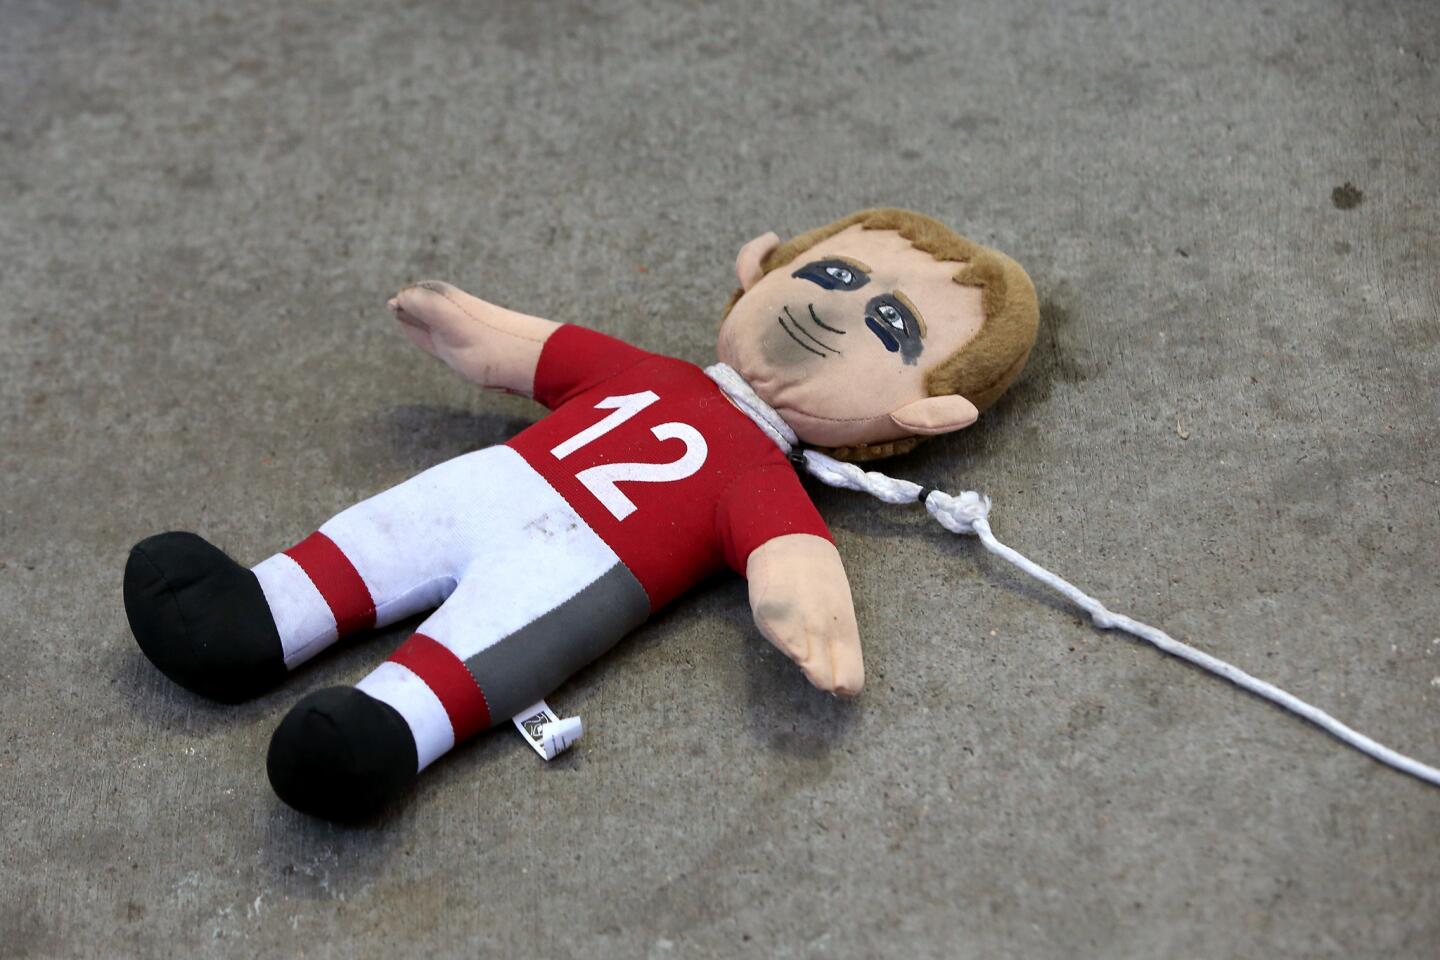 DENVER, CO - JANUARY 24: A Tom Brady #12 of the New England Patriots doll is seen on the ground during the AFC Championship game against the Denver Broncos at Sports Authority Field at Mile High on January 24, 2016 in Denver, Colorado. (Photo by Doug Pensinger/Getty Images) ** OUTS - ELSENT, FPG, CM - OUTS * NM, PH, VA if sourced by CT, LA or MoD **